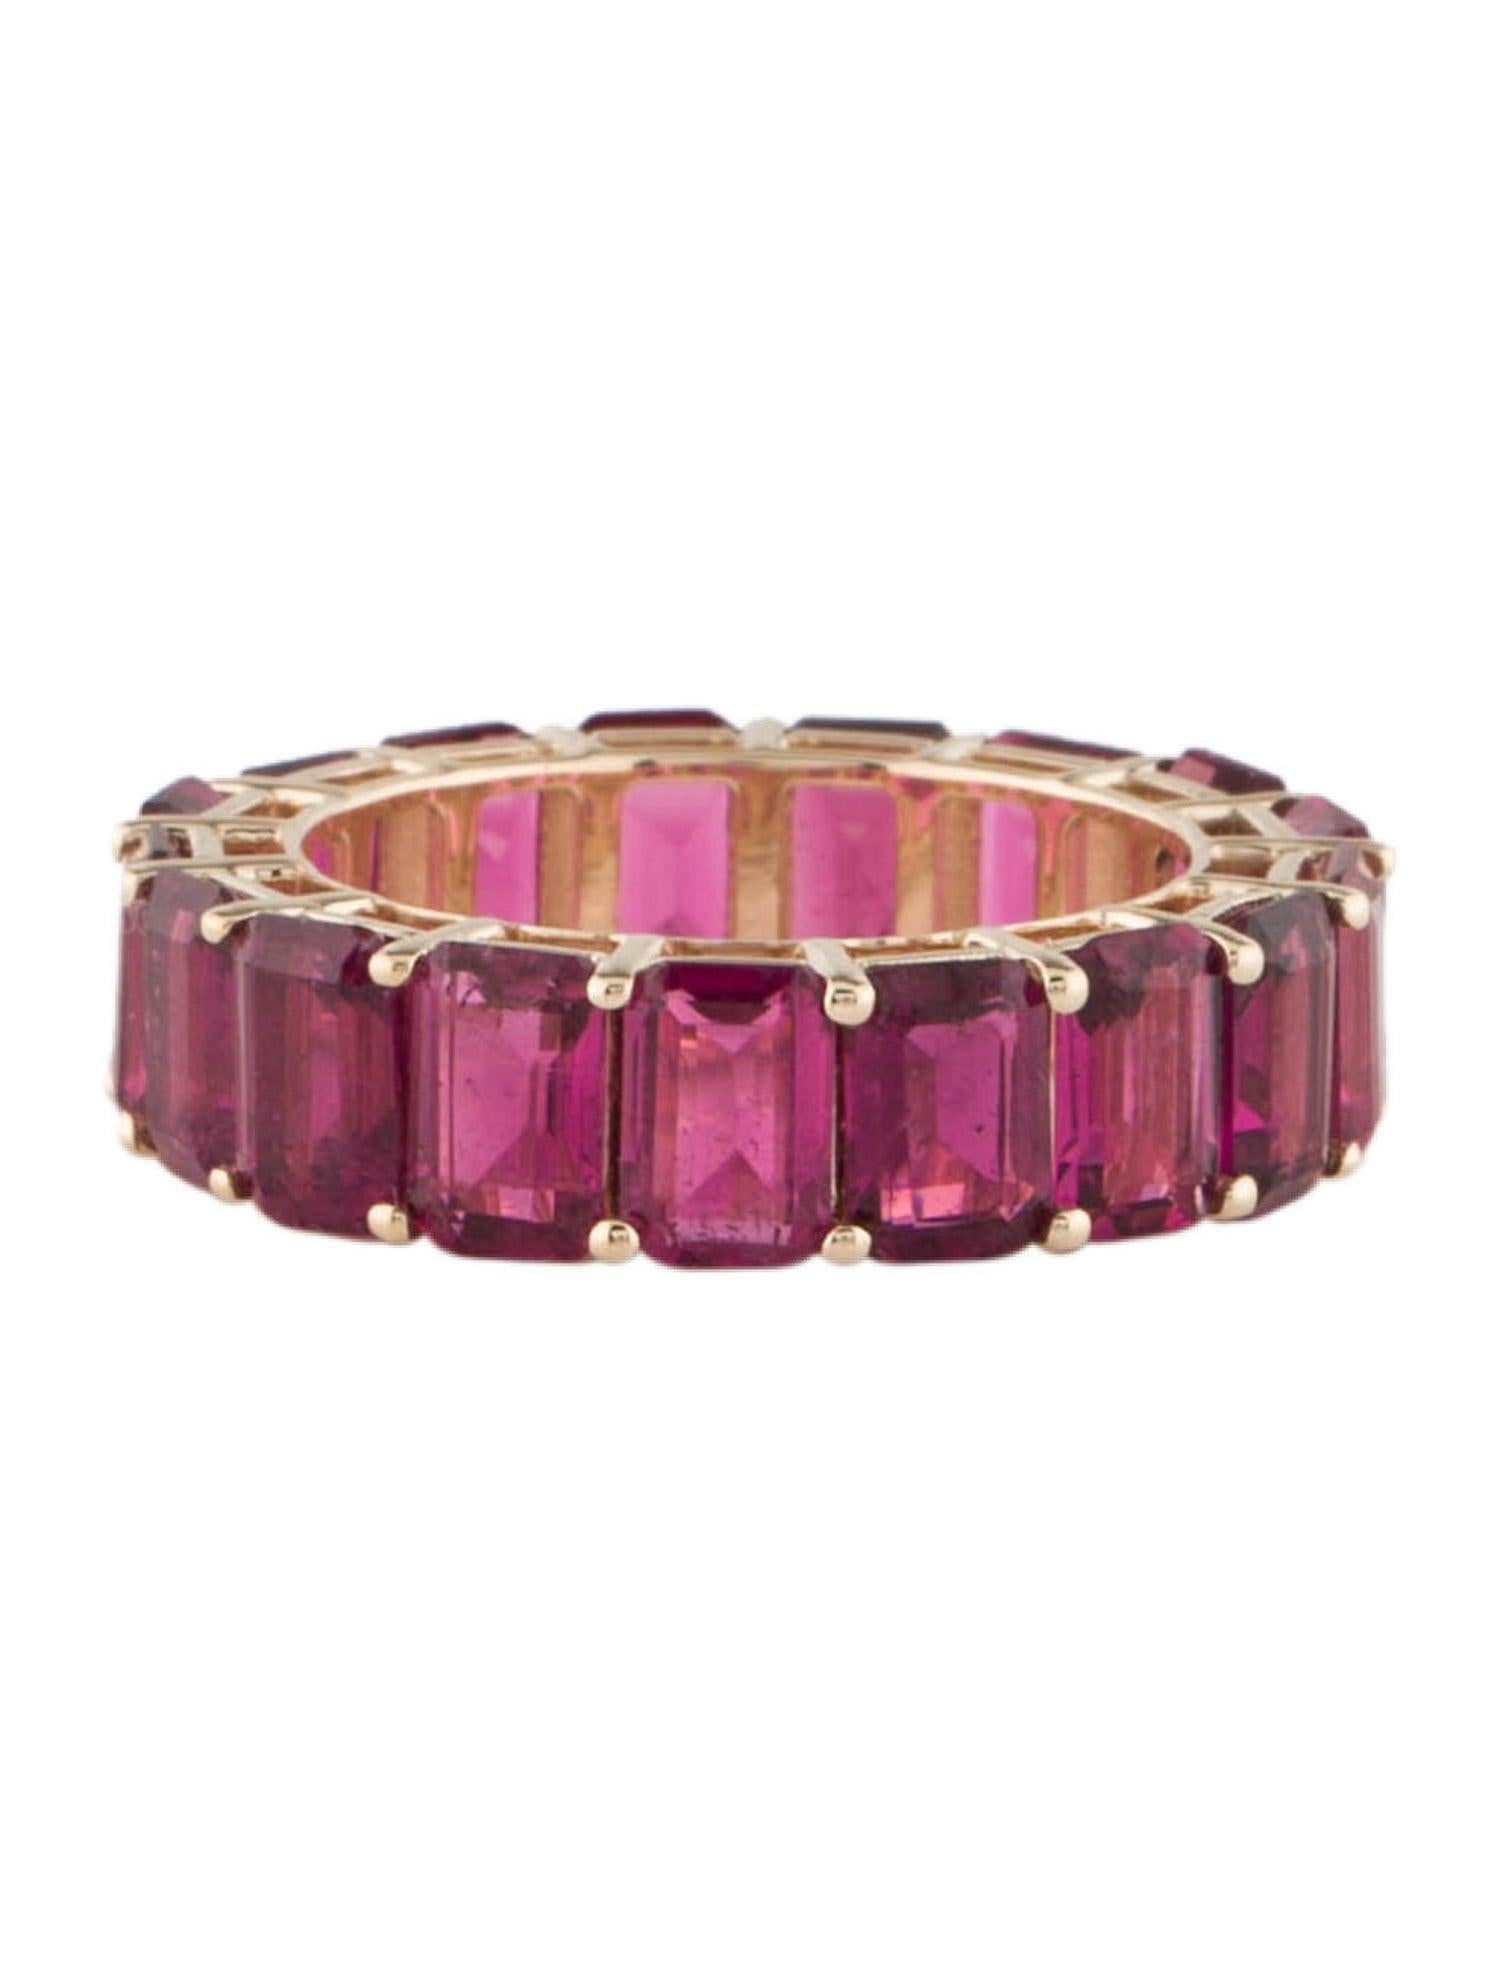 14K Tourmaline Eternity Band 9.97ctw Size 7 - Vibrant Elegance, Stunning Jewelry In New Condition For Sale In Holtsville, NY